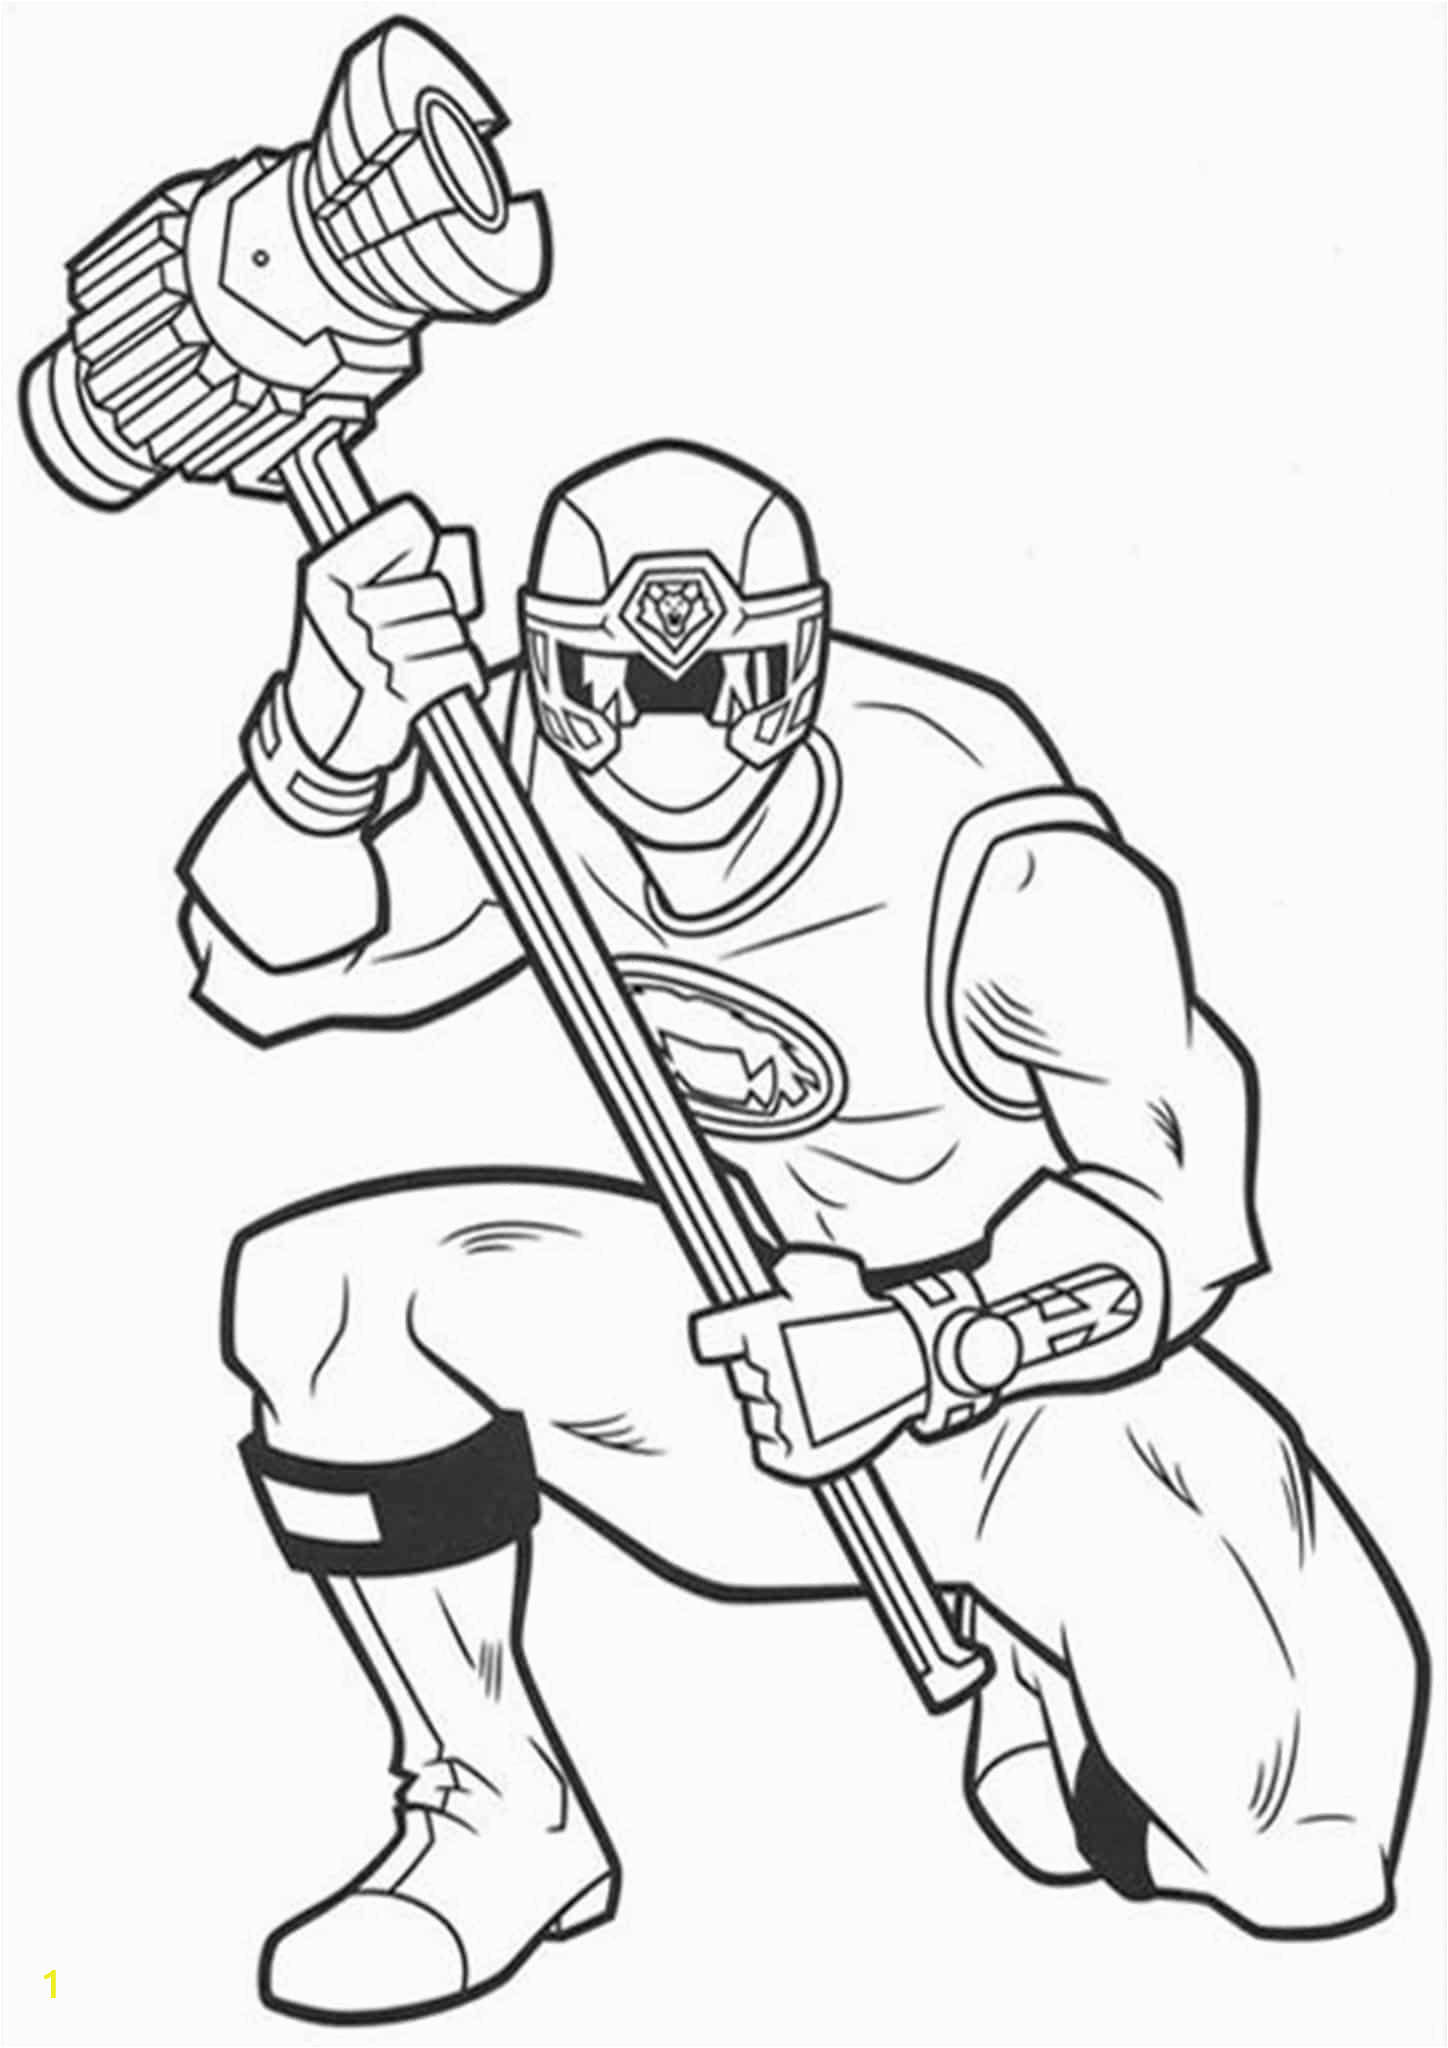 Power Ranger Coloring Pages to Print Free & Easy to Print Power Rangers Coloring Pages Tulamama